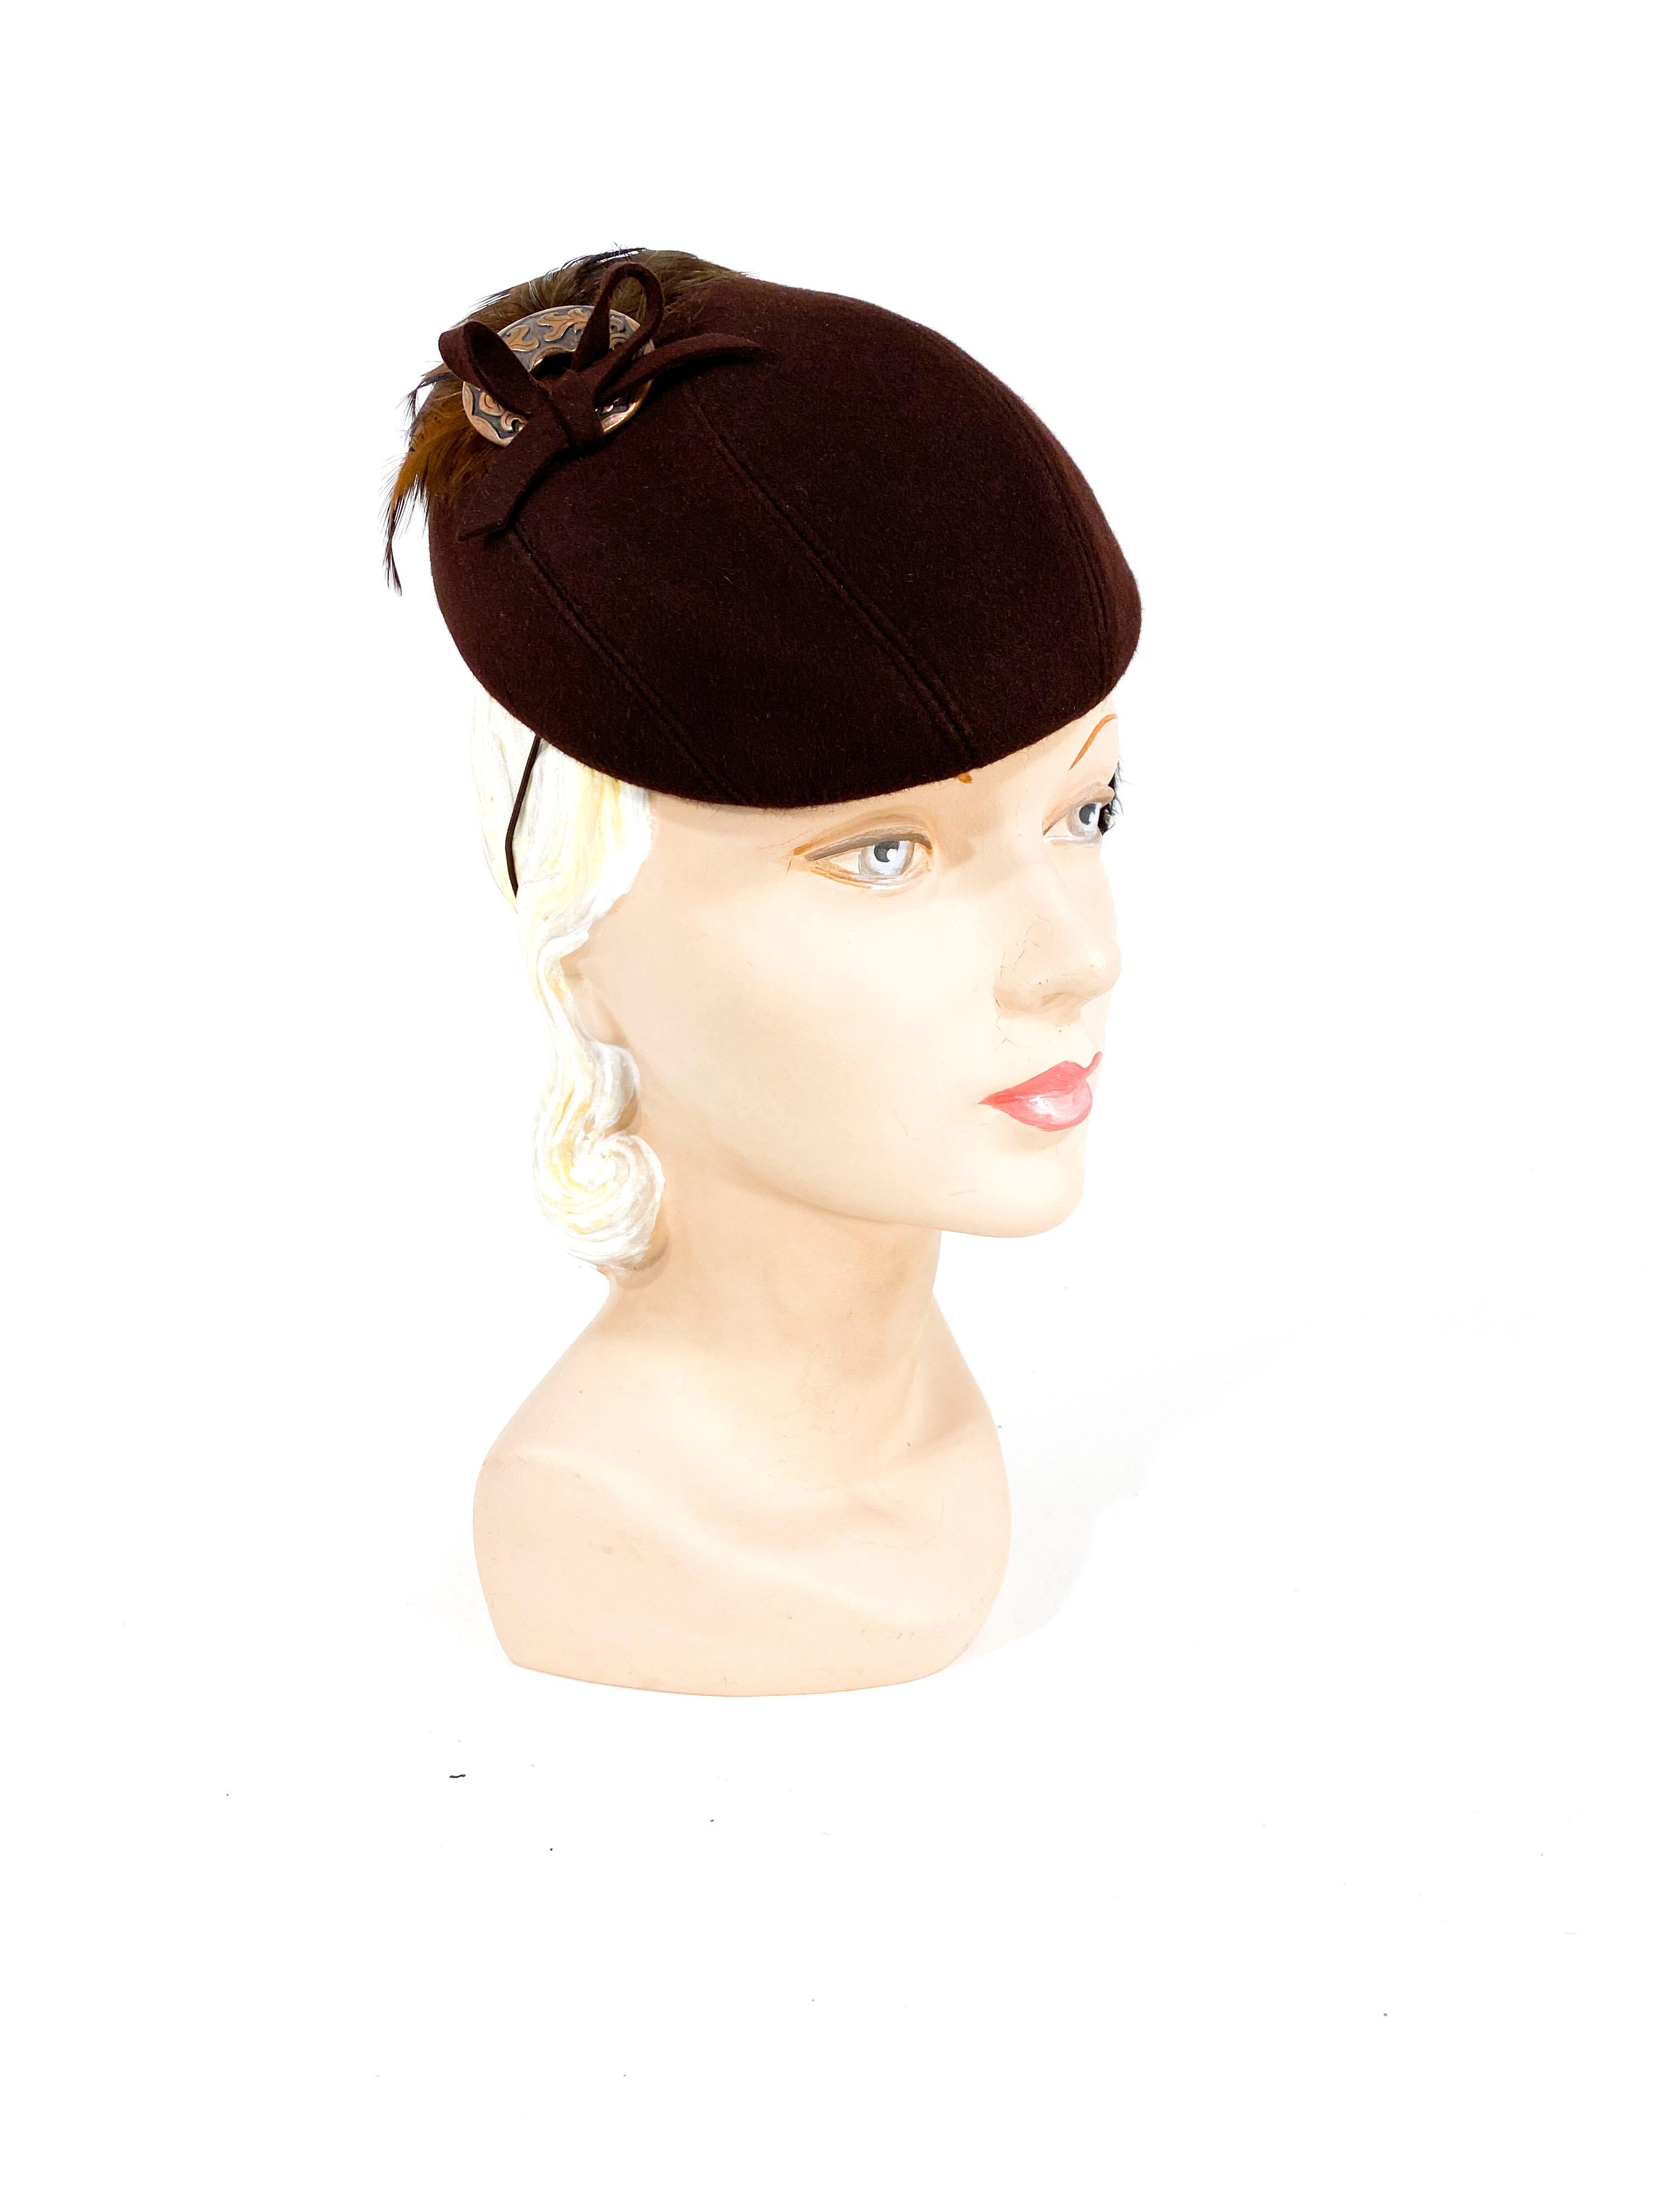 1930s Neiman Marcus brown fur felt hat hand sculpted in to asymmetrical shape. The back is adorned with multi-tones of brown feathers to create a large swoop in the back going from one side of the hat to the other ear. Finished with a decorated